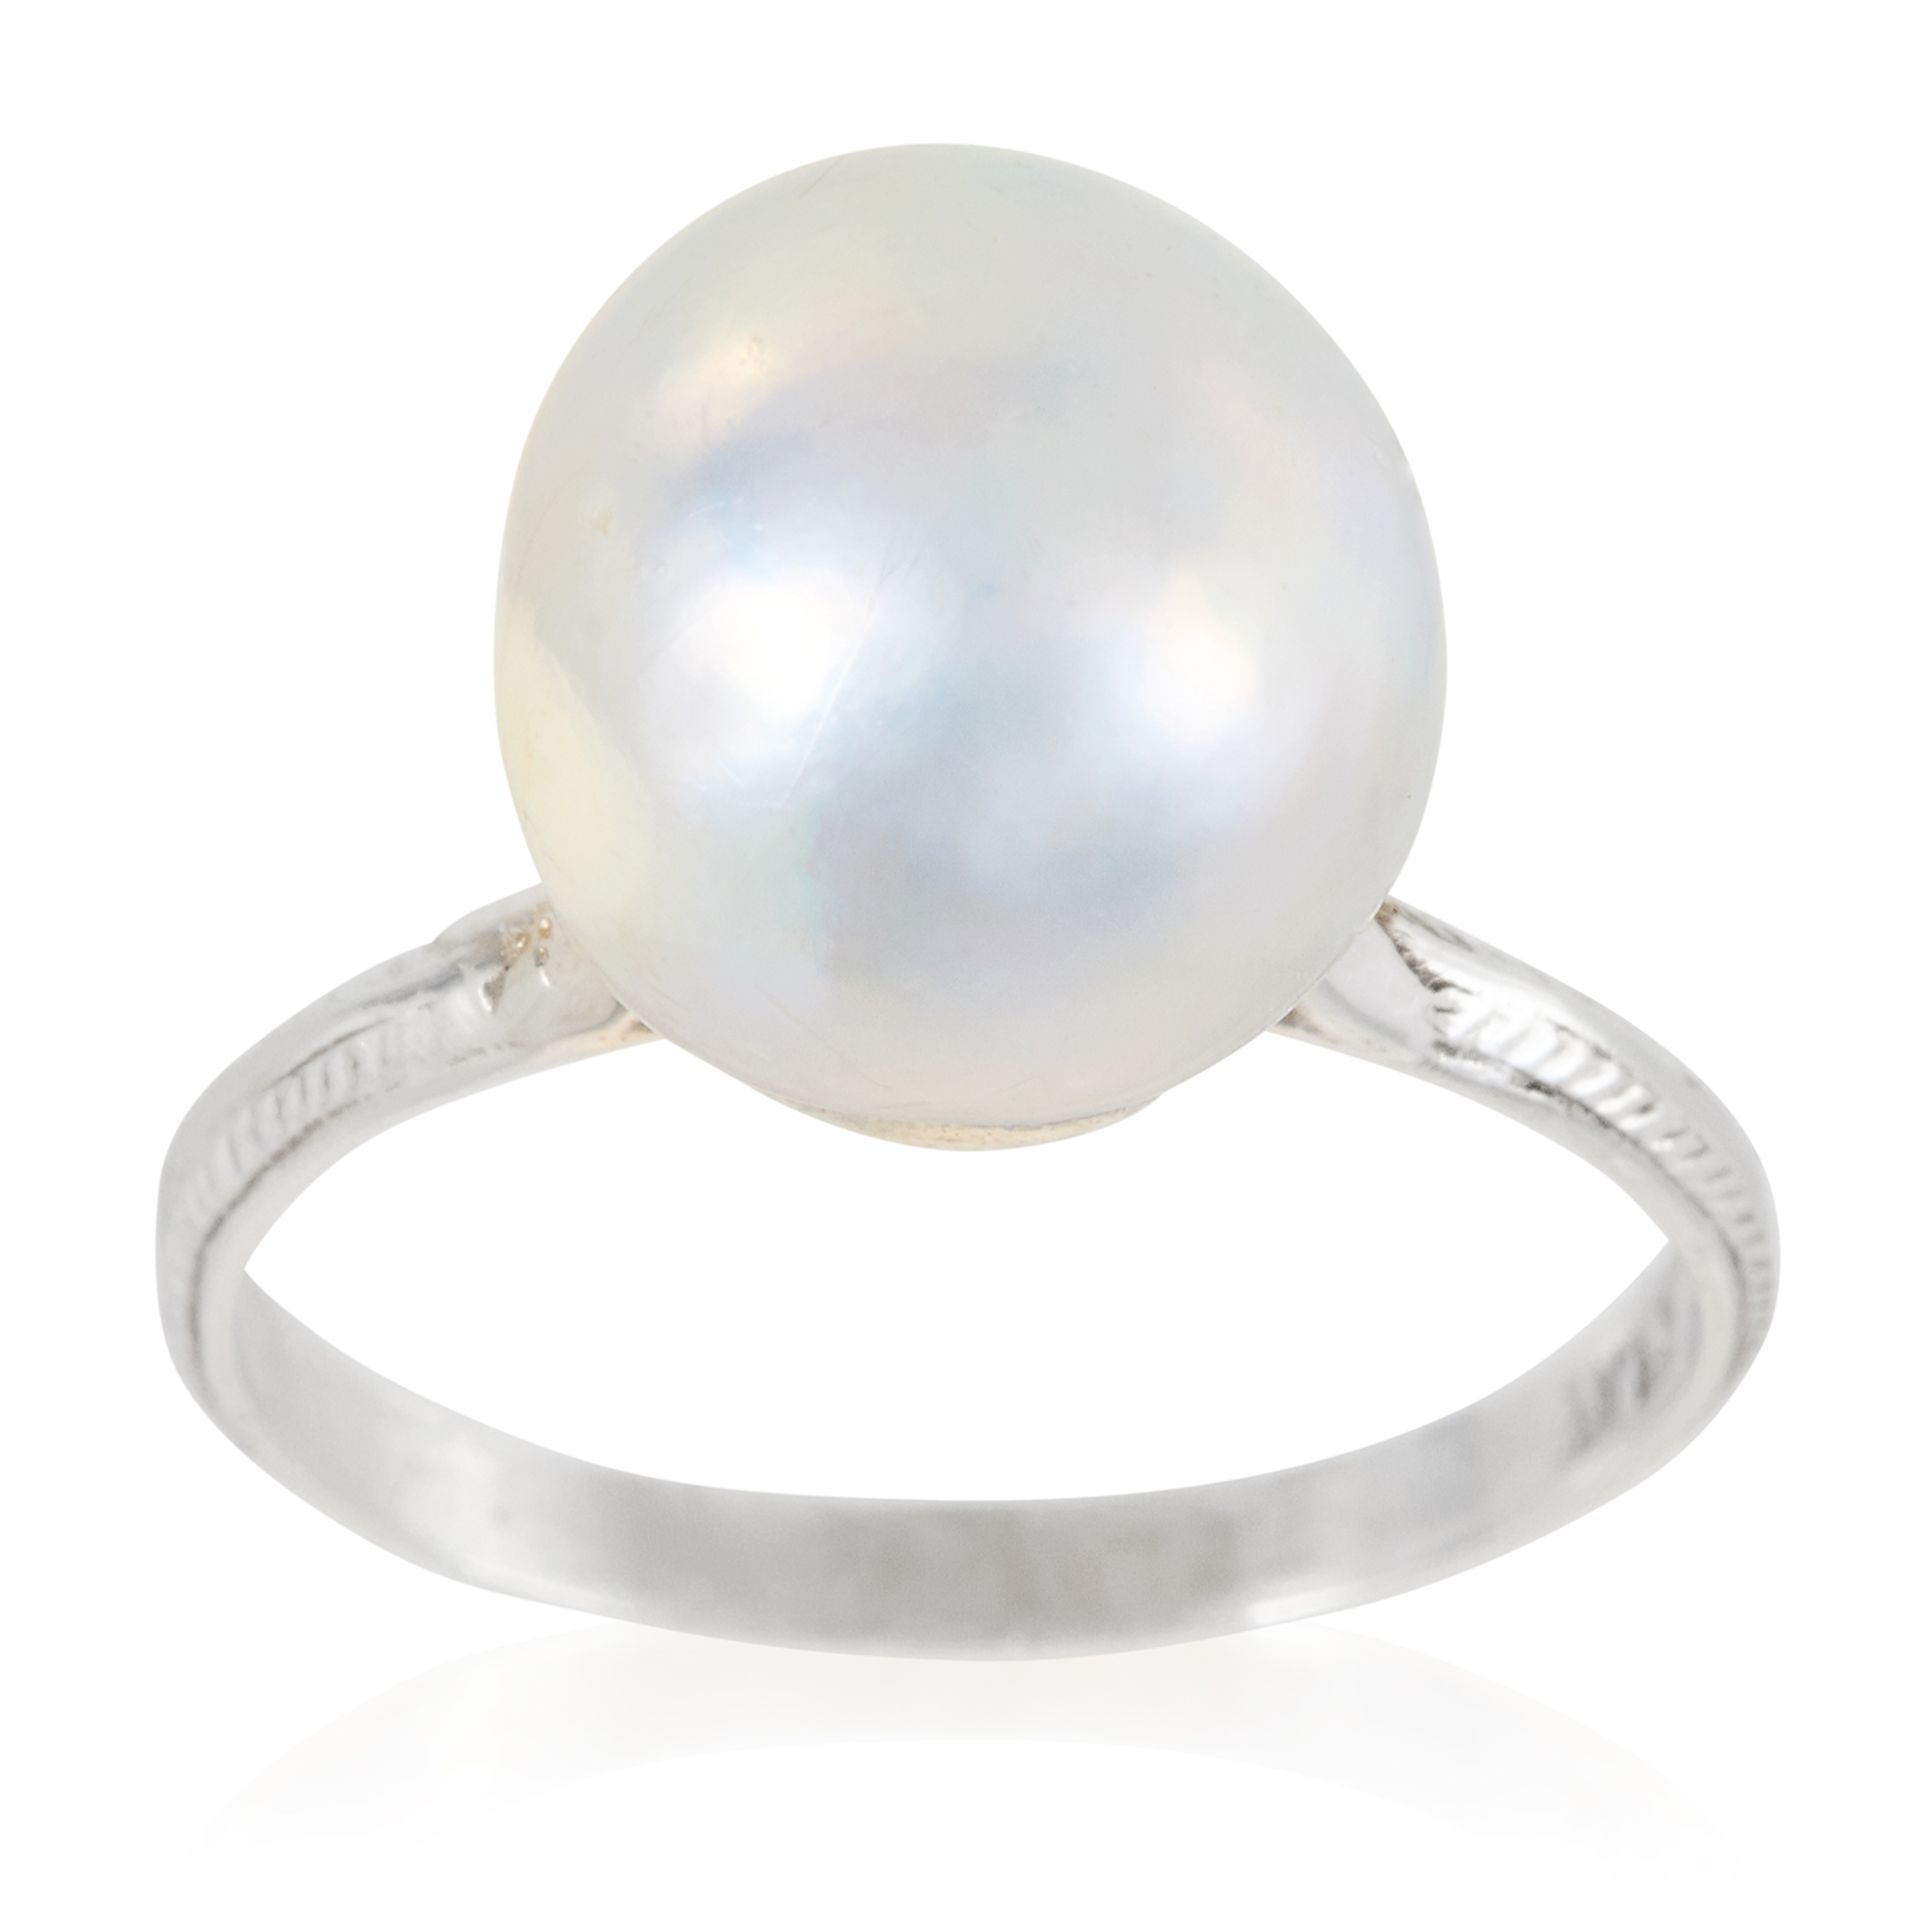 A PEARL DRESS RING in platinum, set with a single pearl of 10.1mm to a plain band, stamped Plat,